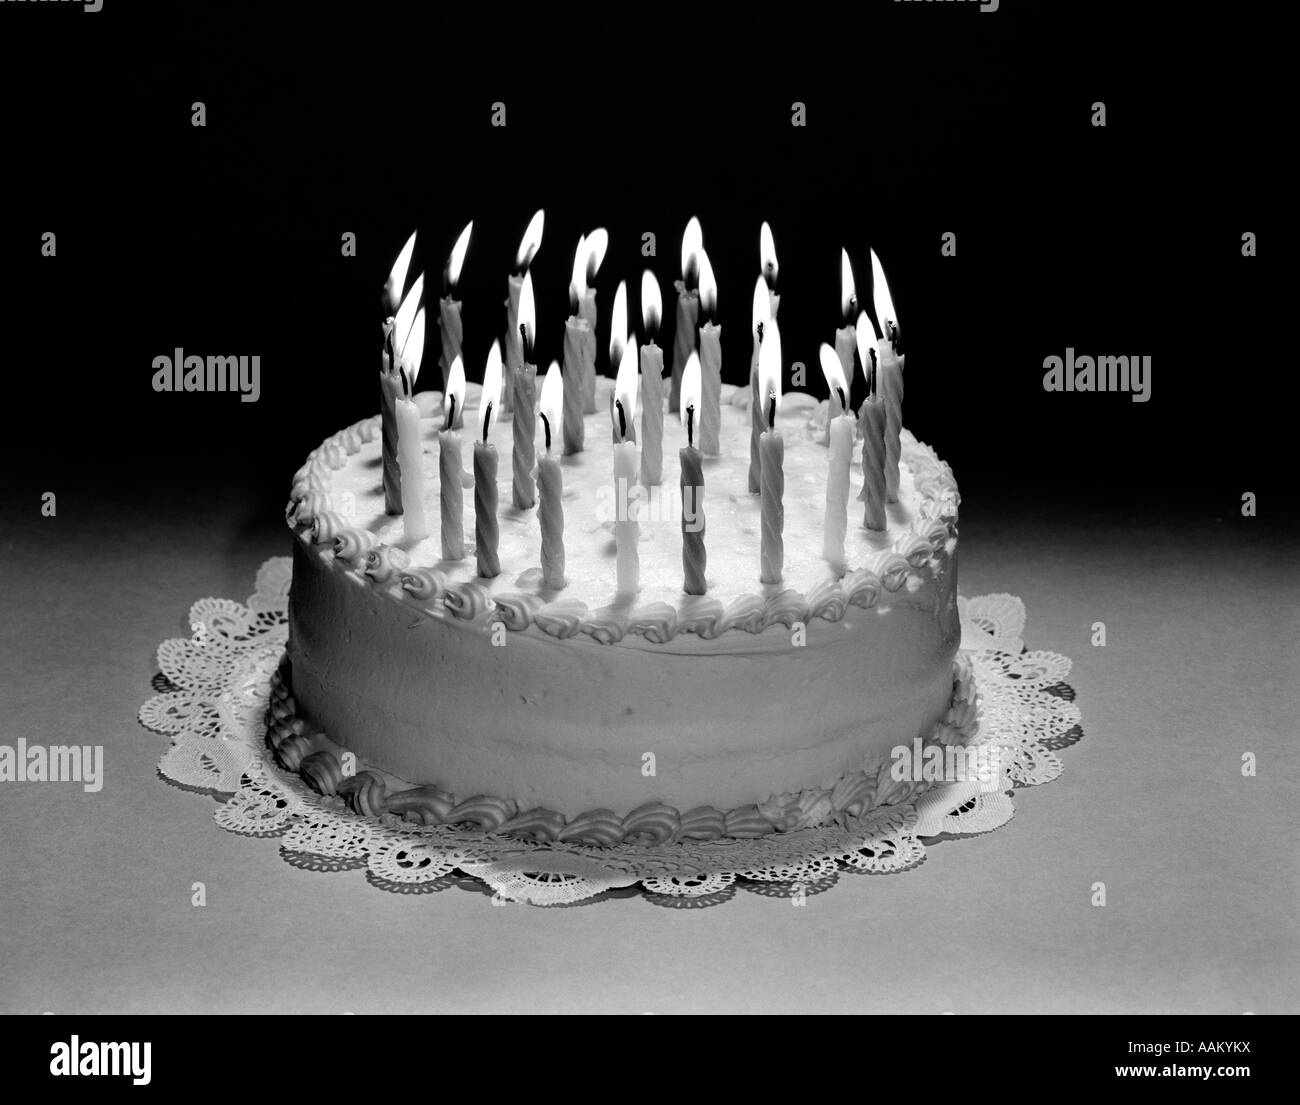 1960s BIRTHDAY CAKE STILL LIFE WITH MANY LIT CANDLES ON TOP OF PAPER DOILY Stock Photo